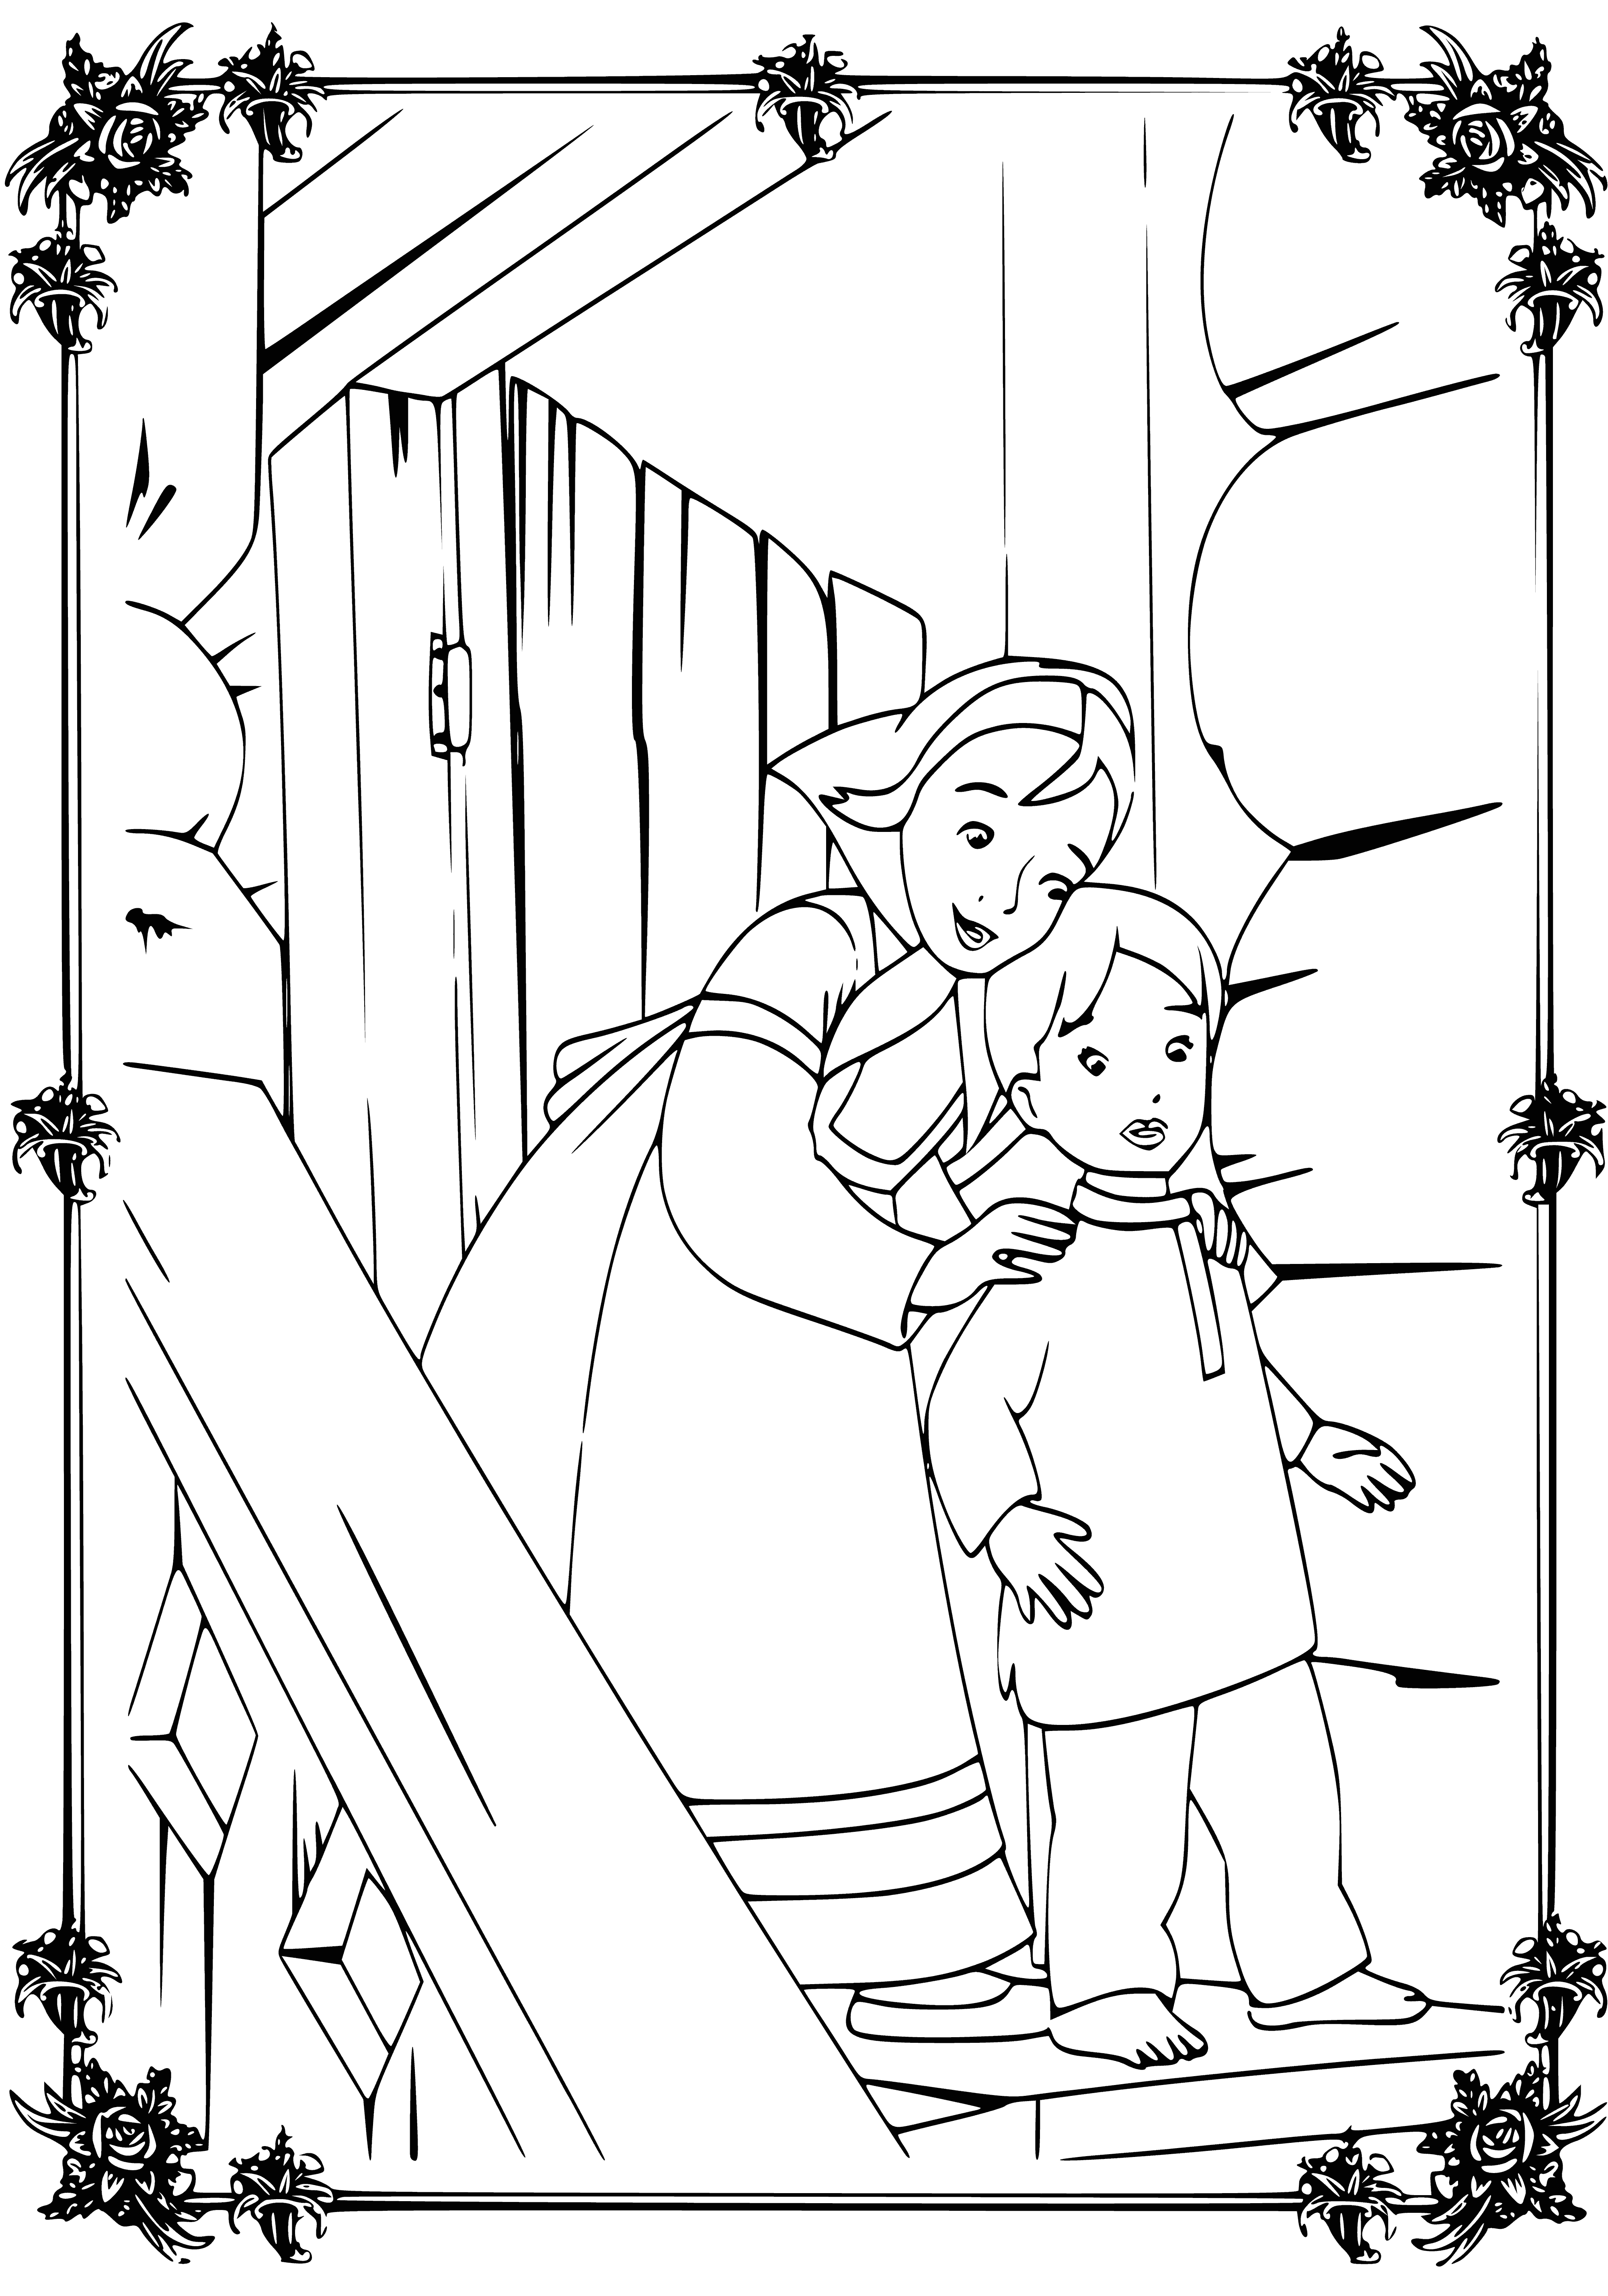 coloring page: Brother comforts sister, love and concern evident, as a dark forest looks on. #familylove